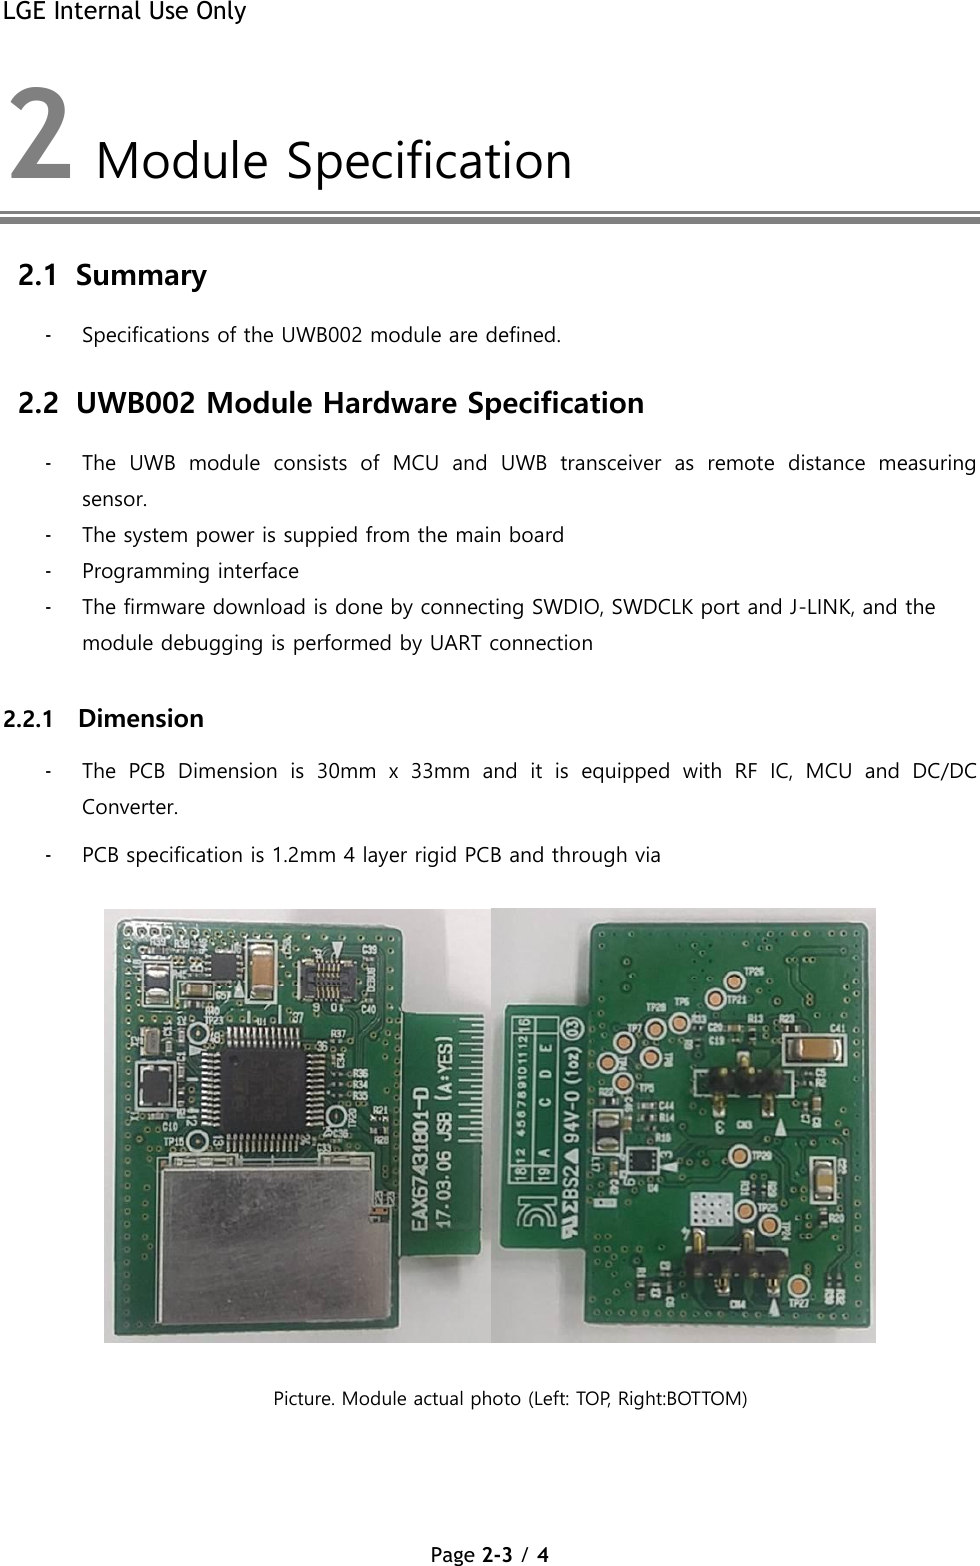 LGE Internal Use Only Page 2-3 / 4  2  Module Specification 2.1 Summary - Specifications of the UWB002 module are defined. 2.2 UWB002 Module Hardware Specification  - The  UWB  module  consists  of  MCU  and  UWB  transceiver  as  remote  distance  measuring sensor. - The system power is suppied from the main board - Programming interface - The firmware download is done by connecting SWDIO, SWDCLK port and J-LINK, and the module debugging is performed by UART connection  2.2.1 Dimension  - The  PCB  Dimension  is  30mm  x  33mm  and  it  is  equipped  with  RF  IC,  MCU  and  DC/DC Converter. - PCB specification is 1.2mm 4 layer rigid PCB and through via     Picture. Module actual photo (Left: TOP, Right:BOTTOM)      